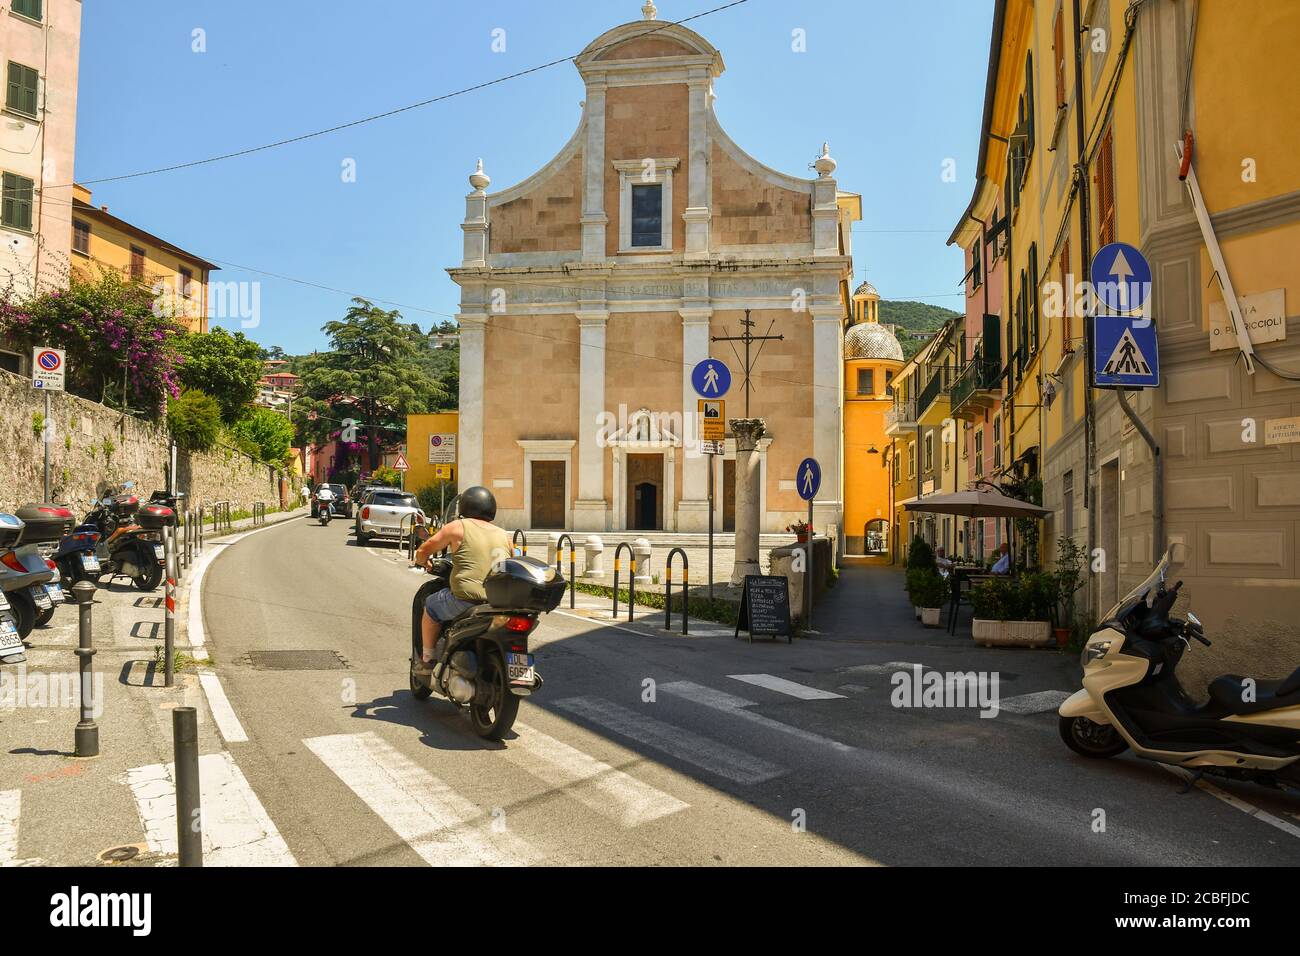 A man on a scooter passing on the road in front of the church of Saint Francis in the old sea town, Lerici, La Spezia, Liguria, Italy Stock Photo